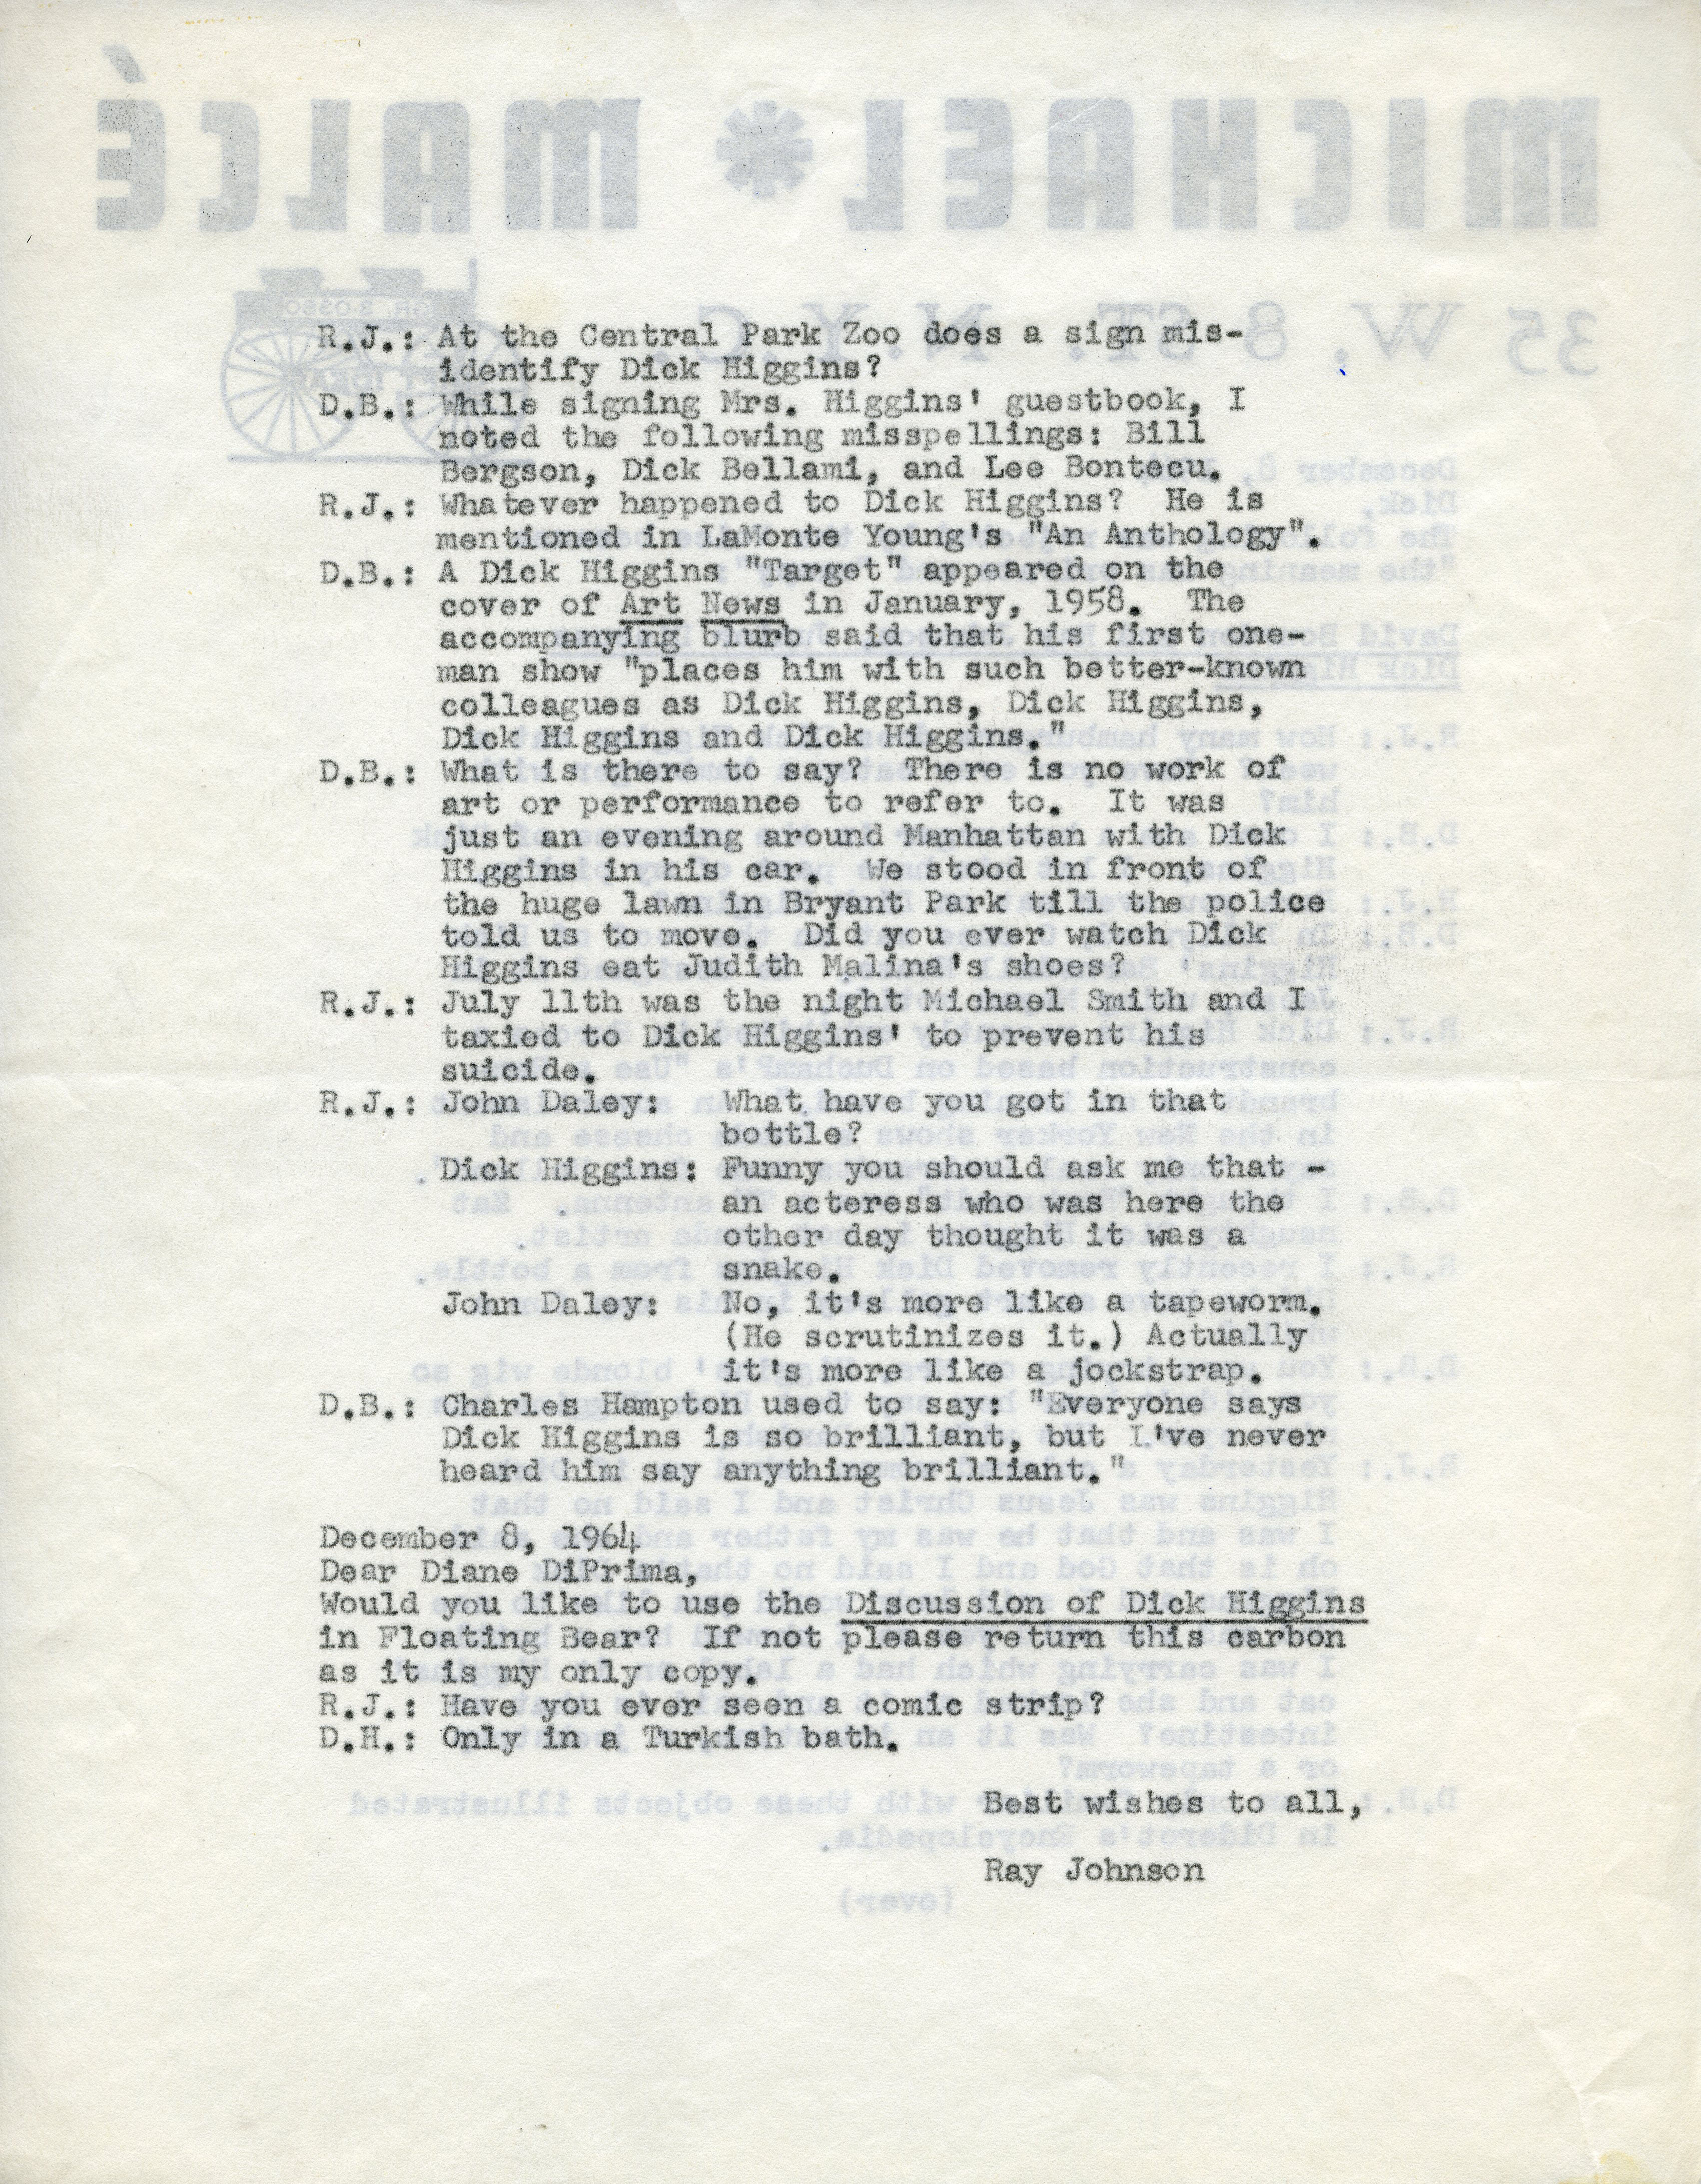 Part of the Ray Johnson Estate. One side of a letter from Ray Johnson to Dick Higgins on Michael Malce stationary reproducing a conversation between Johnson and David Bourdon regarding Higgins that was rejected from the Village Voice. The letter is dated December 8, 1964.